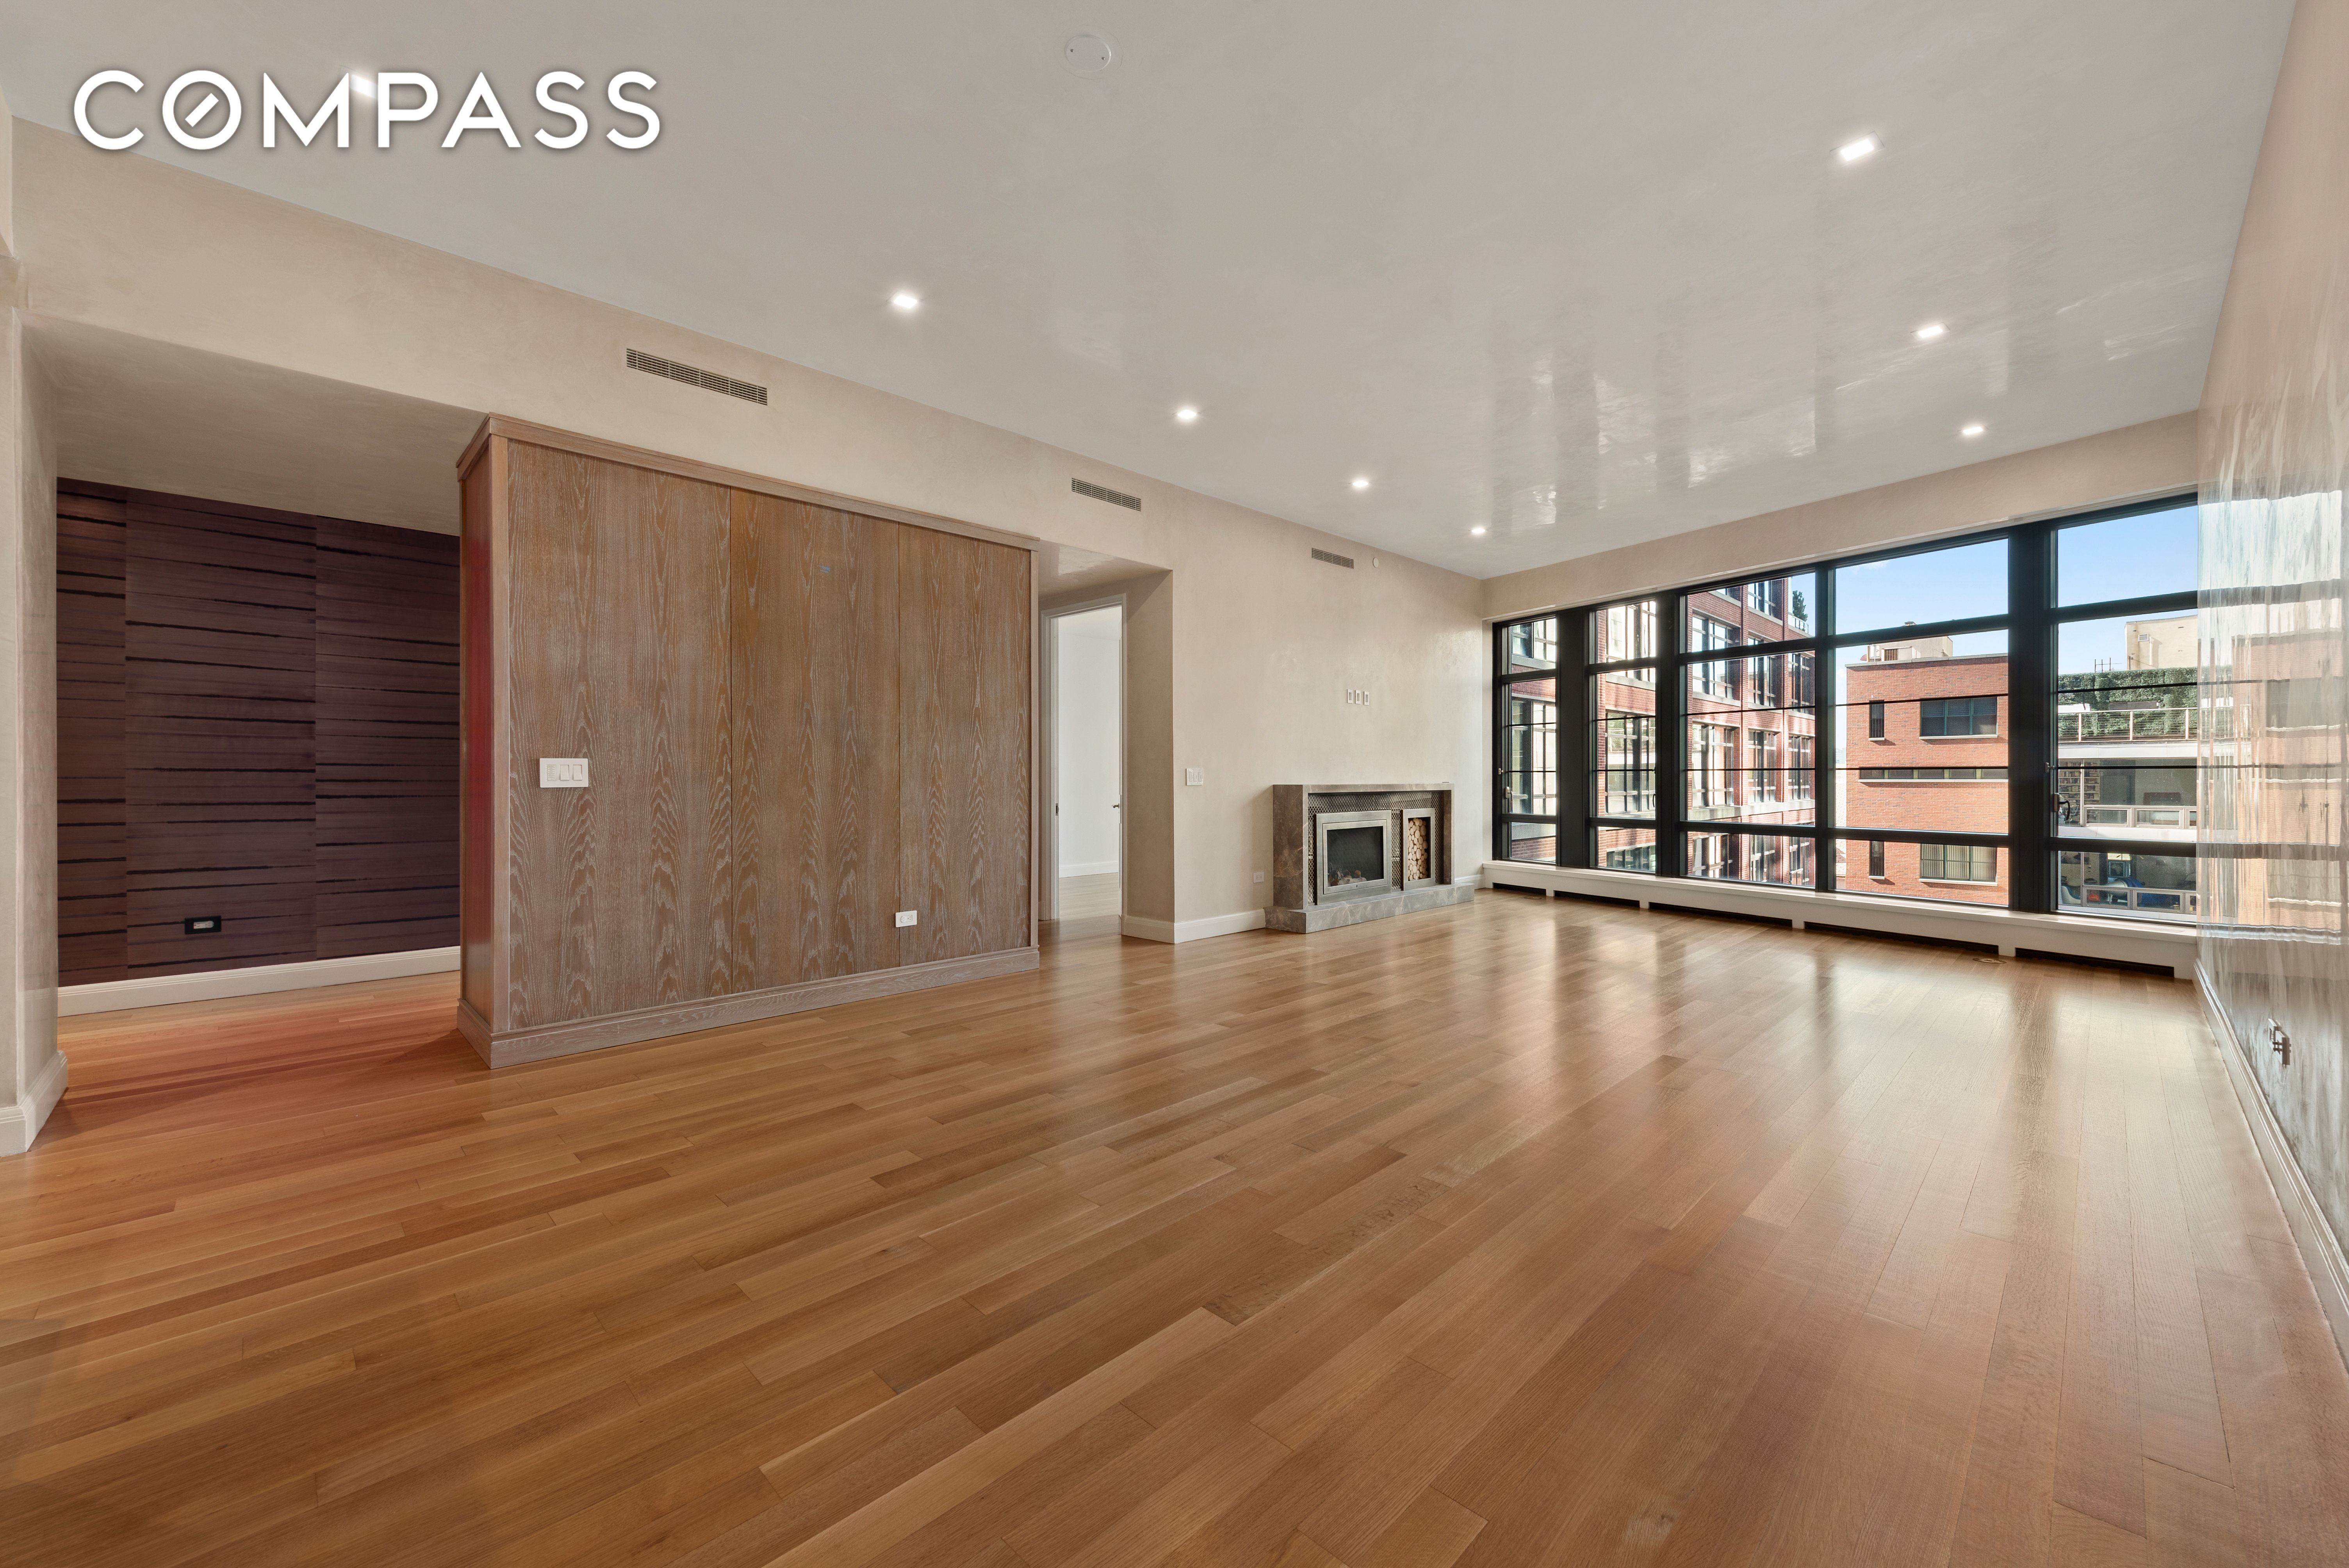 150 Charles Street 4S, West Village, Downtown, NYC - 3 Bedrooms  
3.5 Bathrooms  
8 Rooms - 